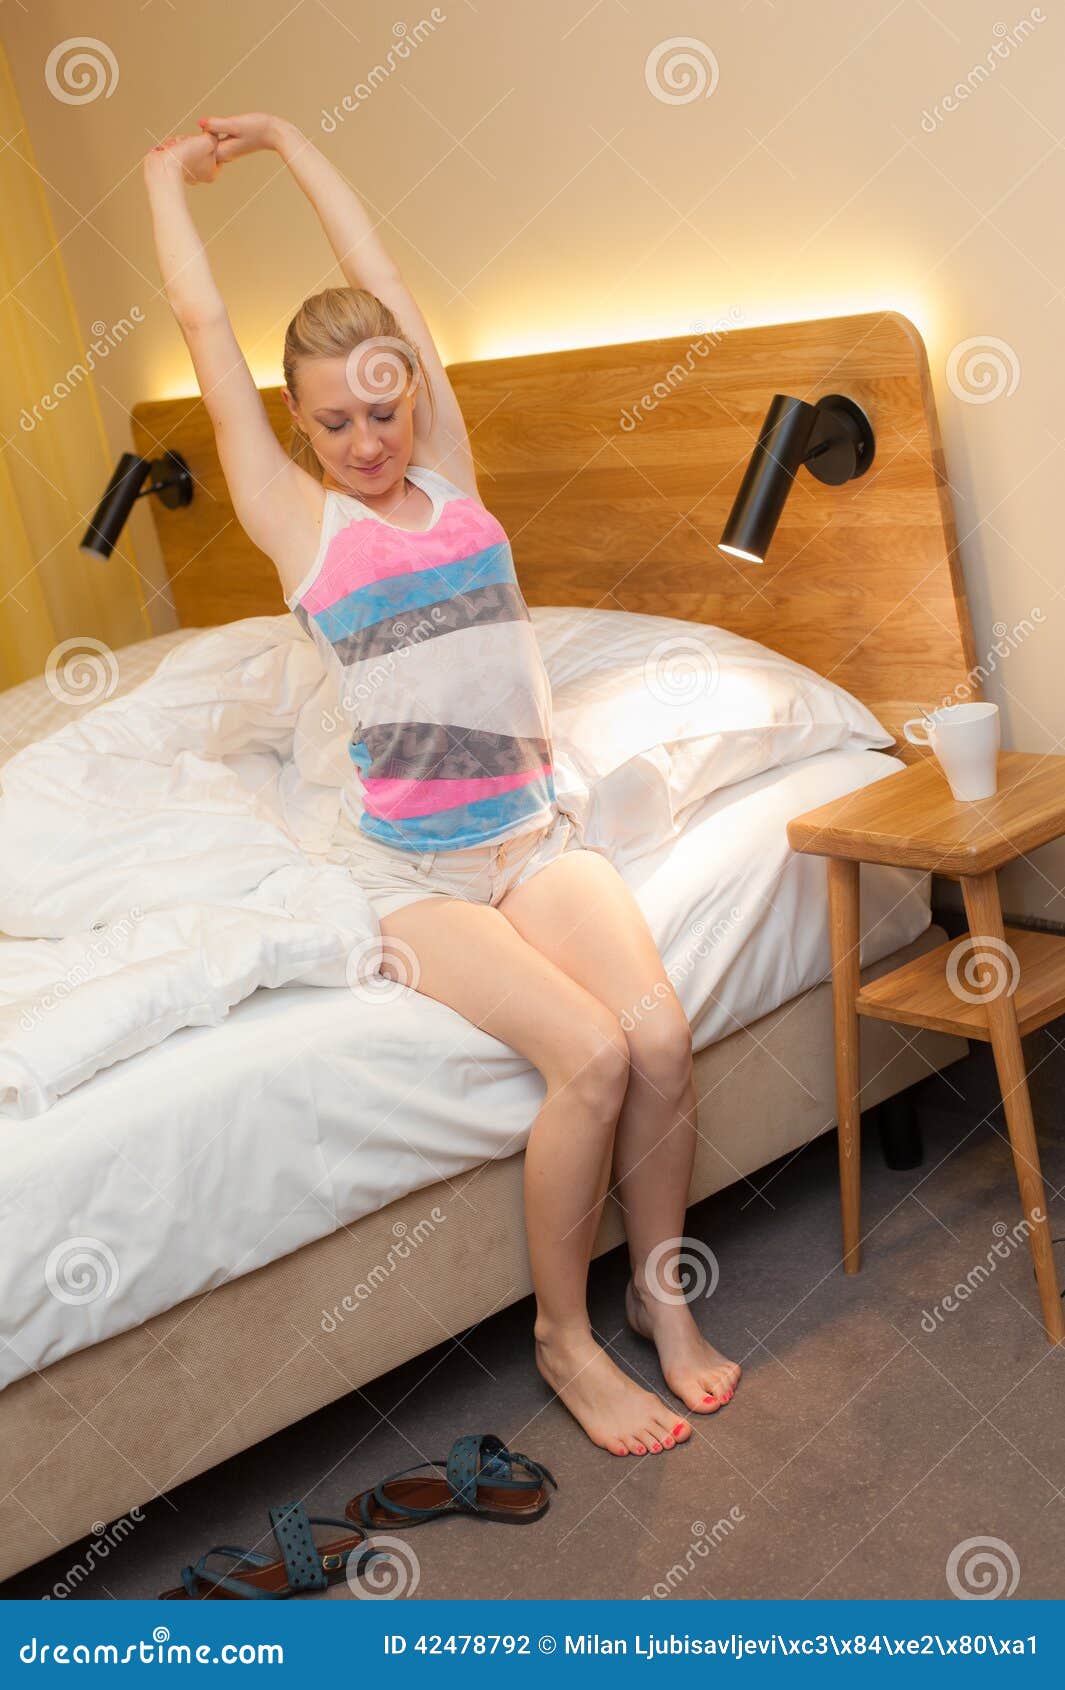 107 Woman Getting Out Bed Photos Free Royalty Free Stock Photos From Dreamstime